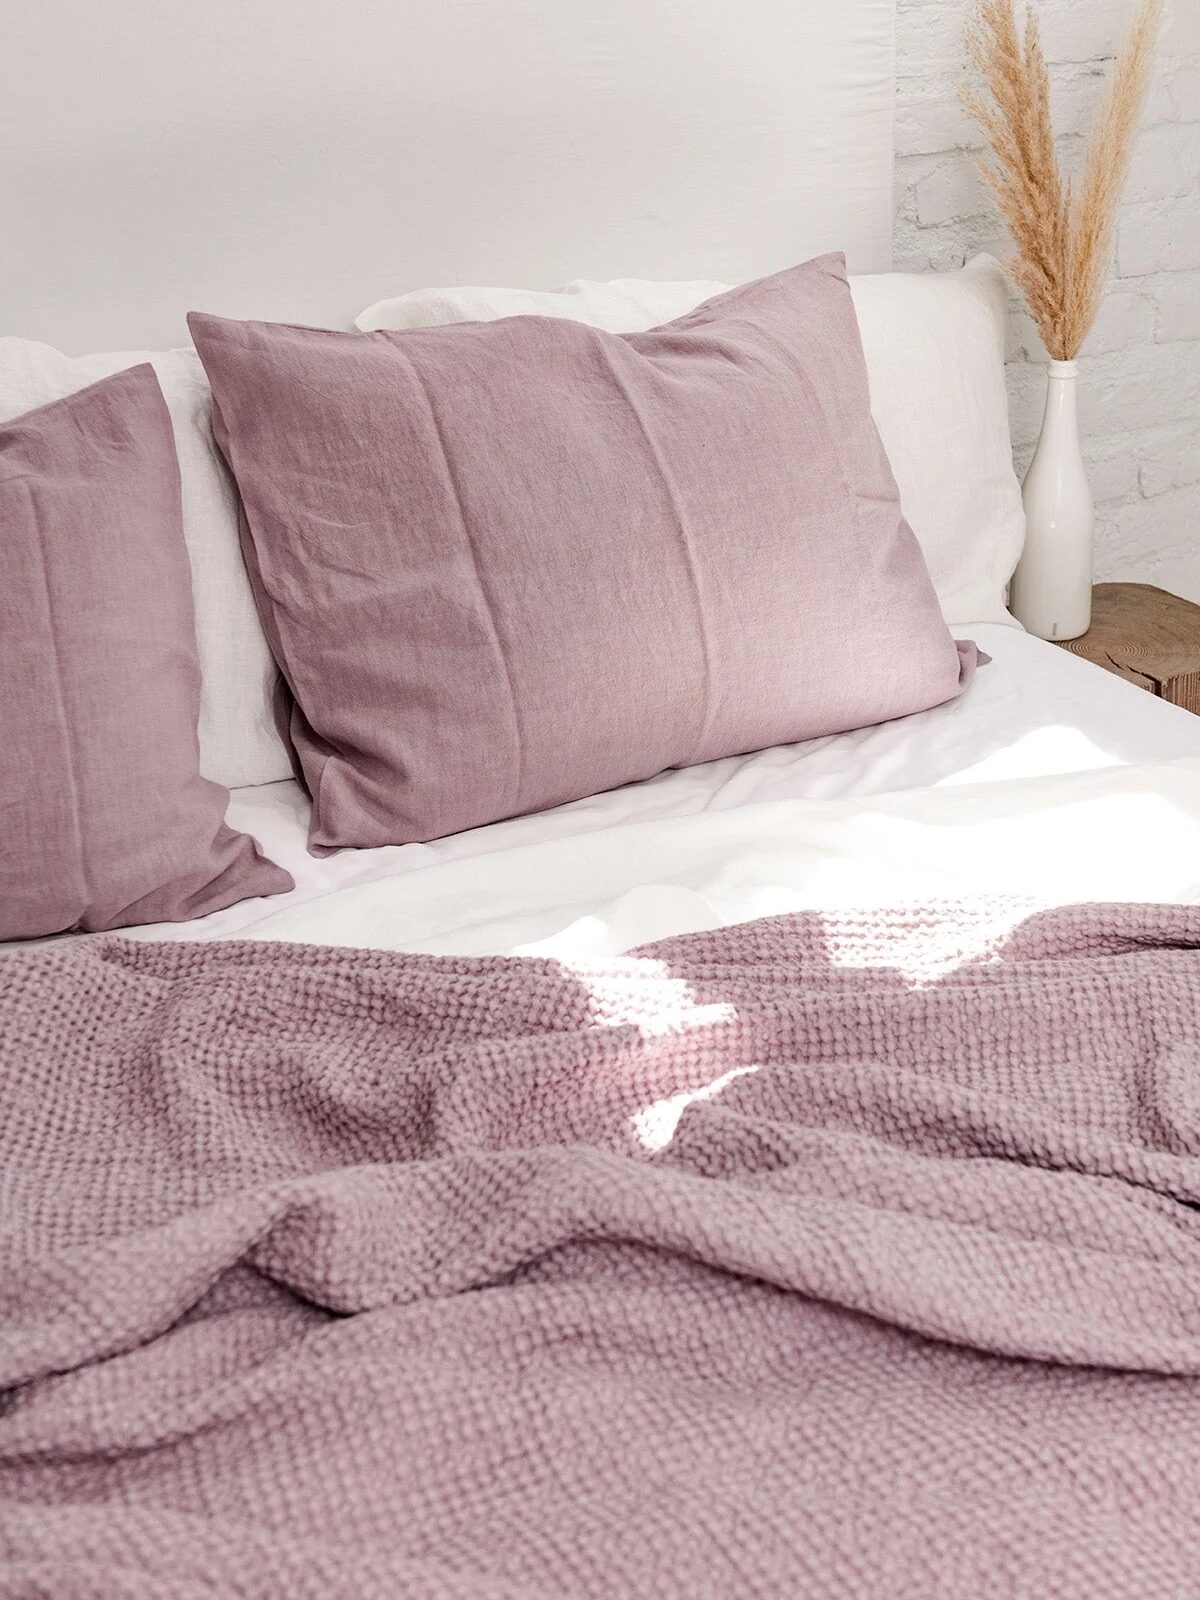 A neatly made bed with plush pink pillows and a textured pink throw blanket, set against a white wall with decorative dried plants.